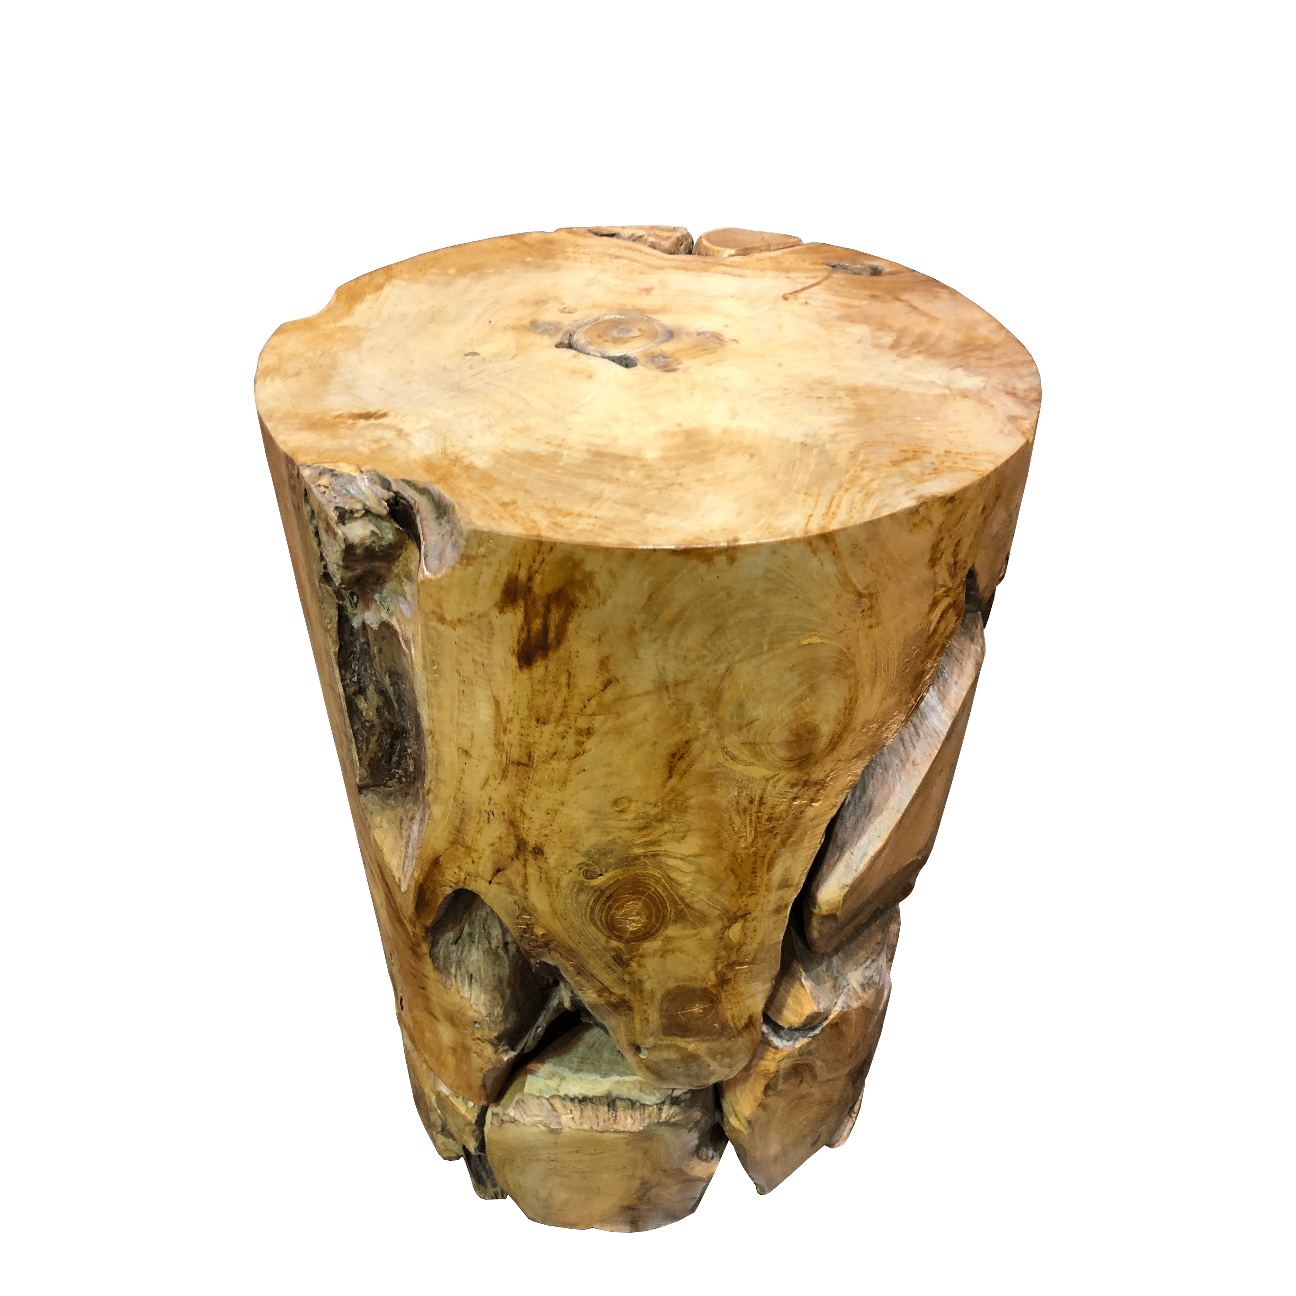  The top of the teak pedestal side table is a smooth piece of teak wood to maximize usable space without taking away from the deep grooves and notches of the natural teak wood. 